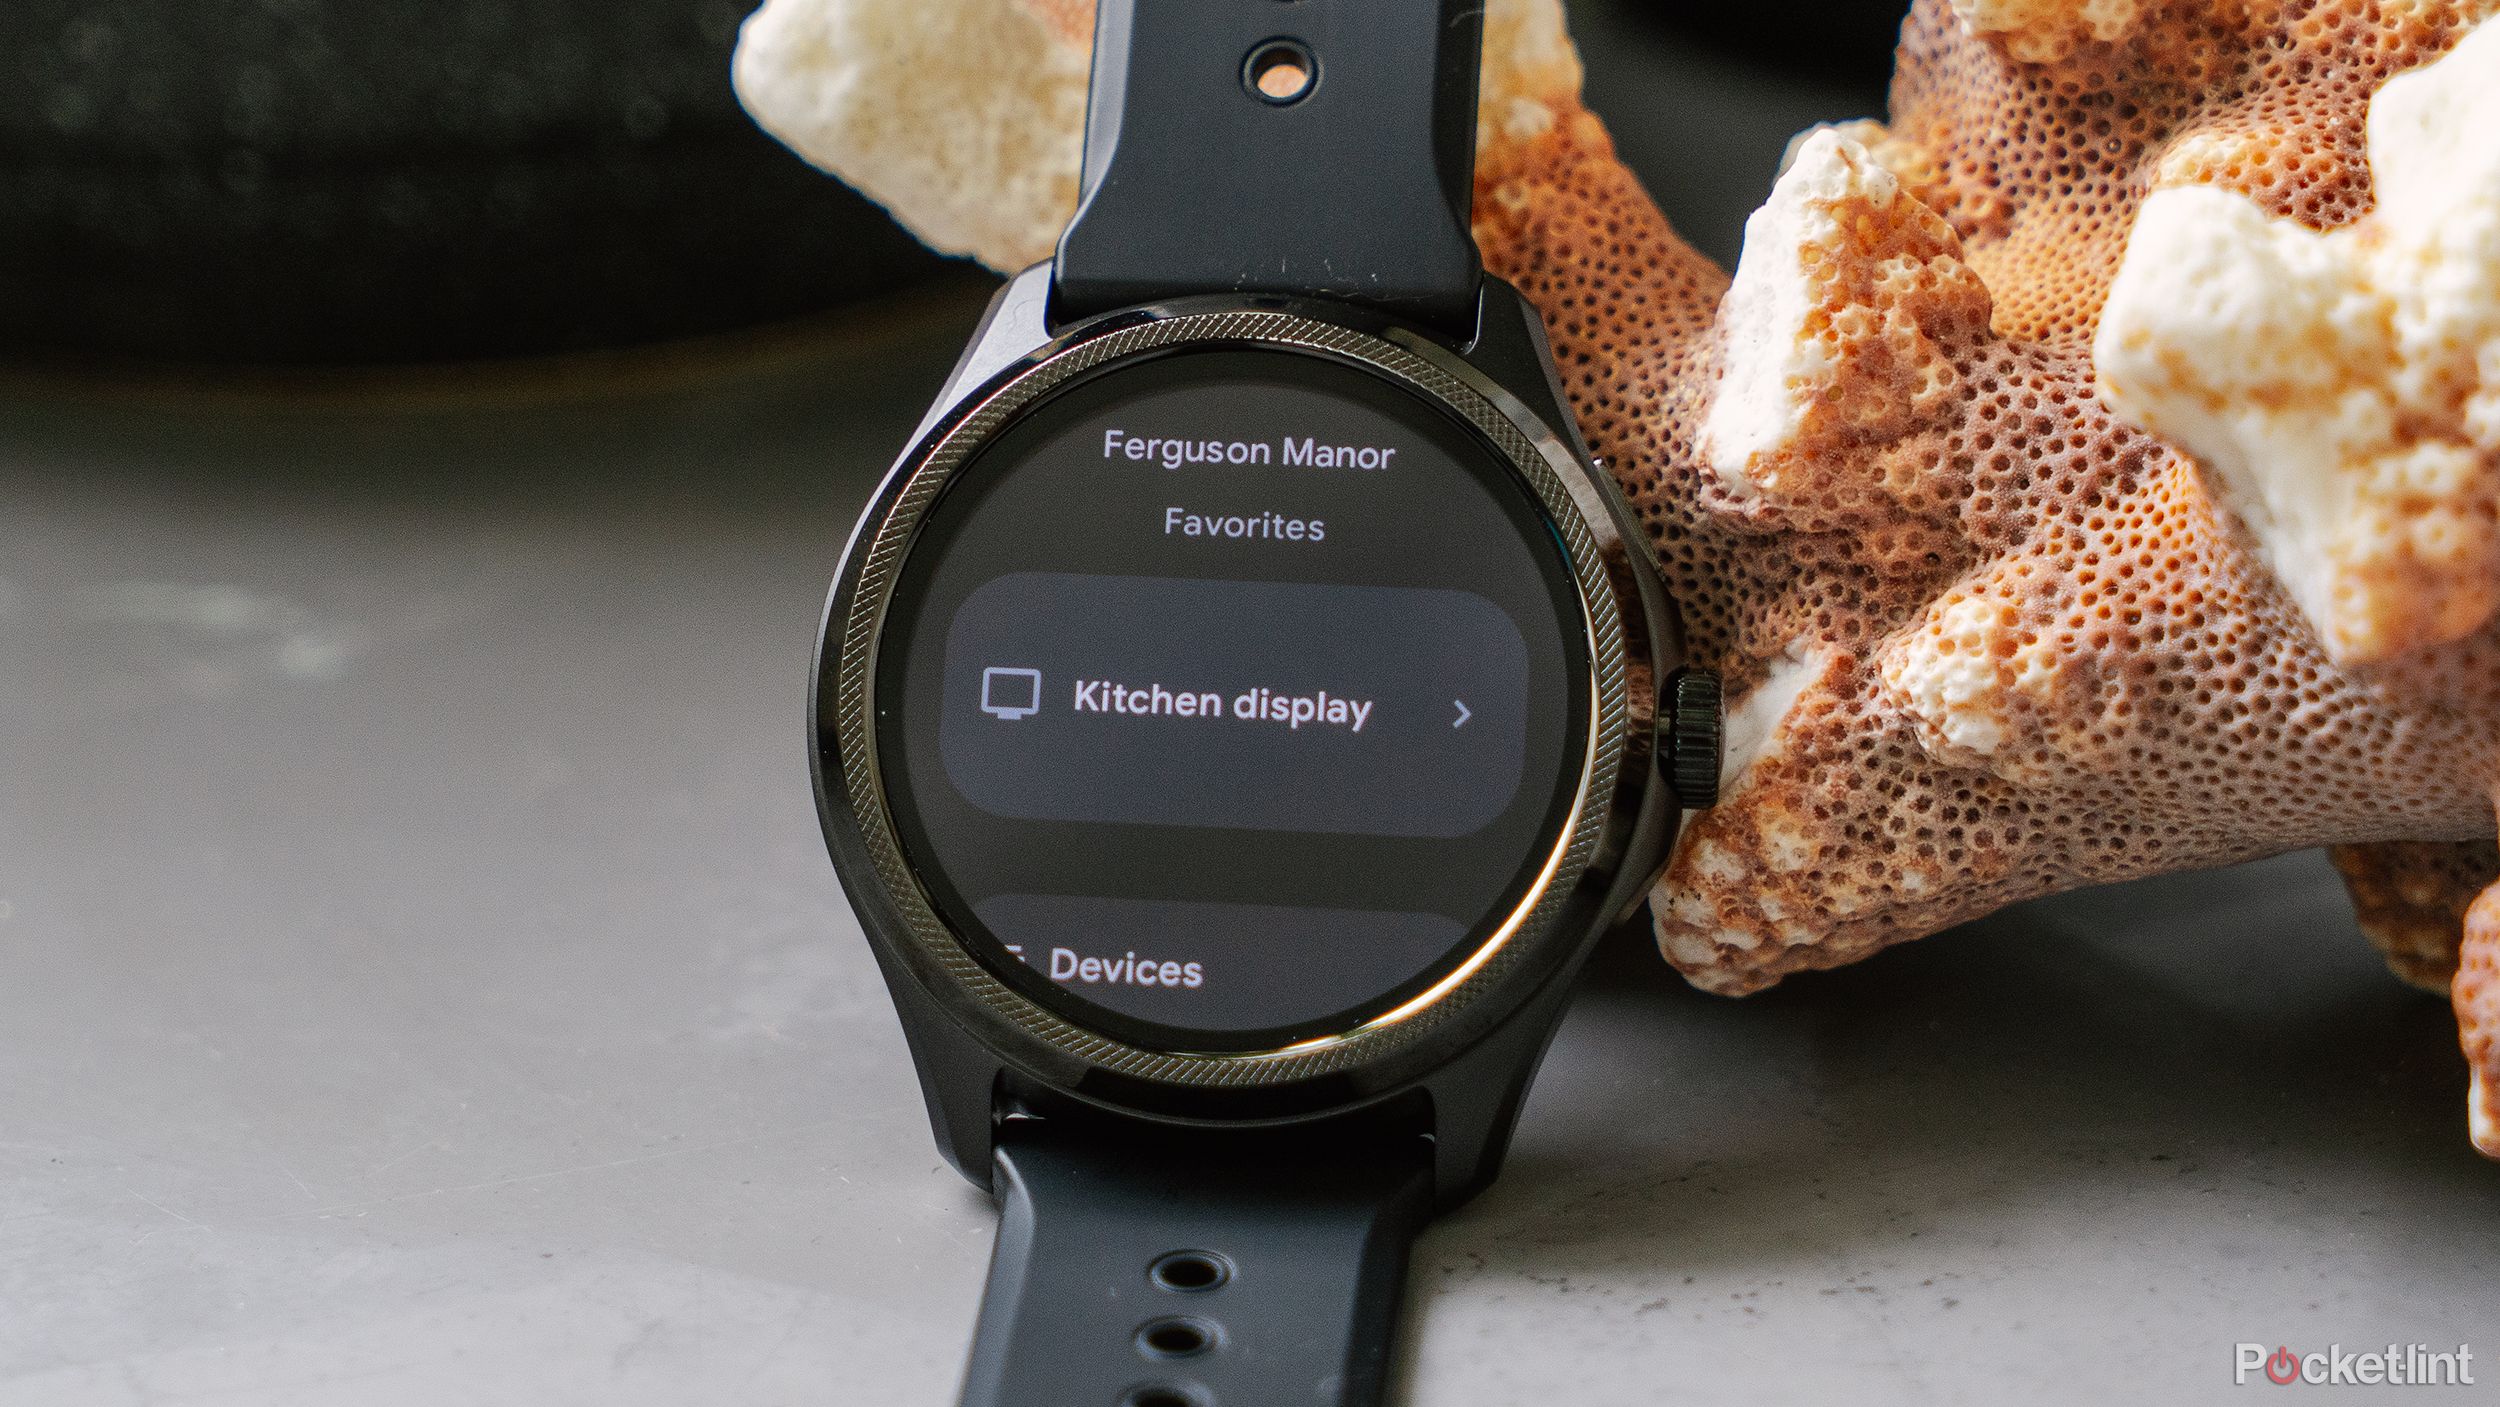 The Google Home app is displayed on the TicWatch Pro 5.